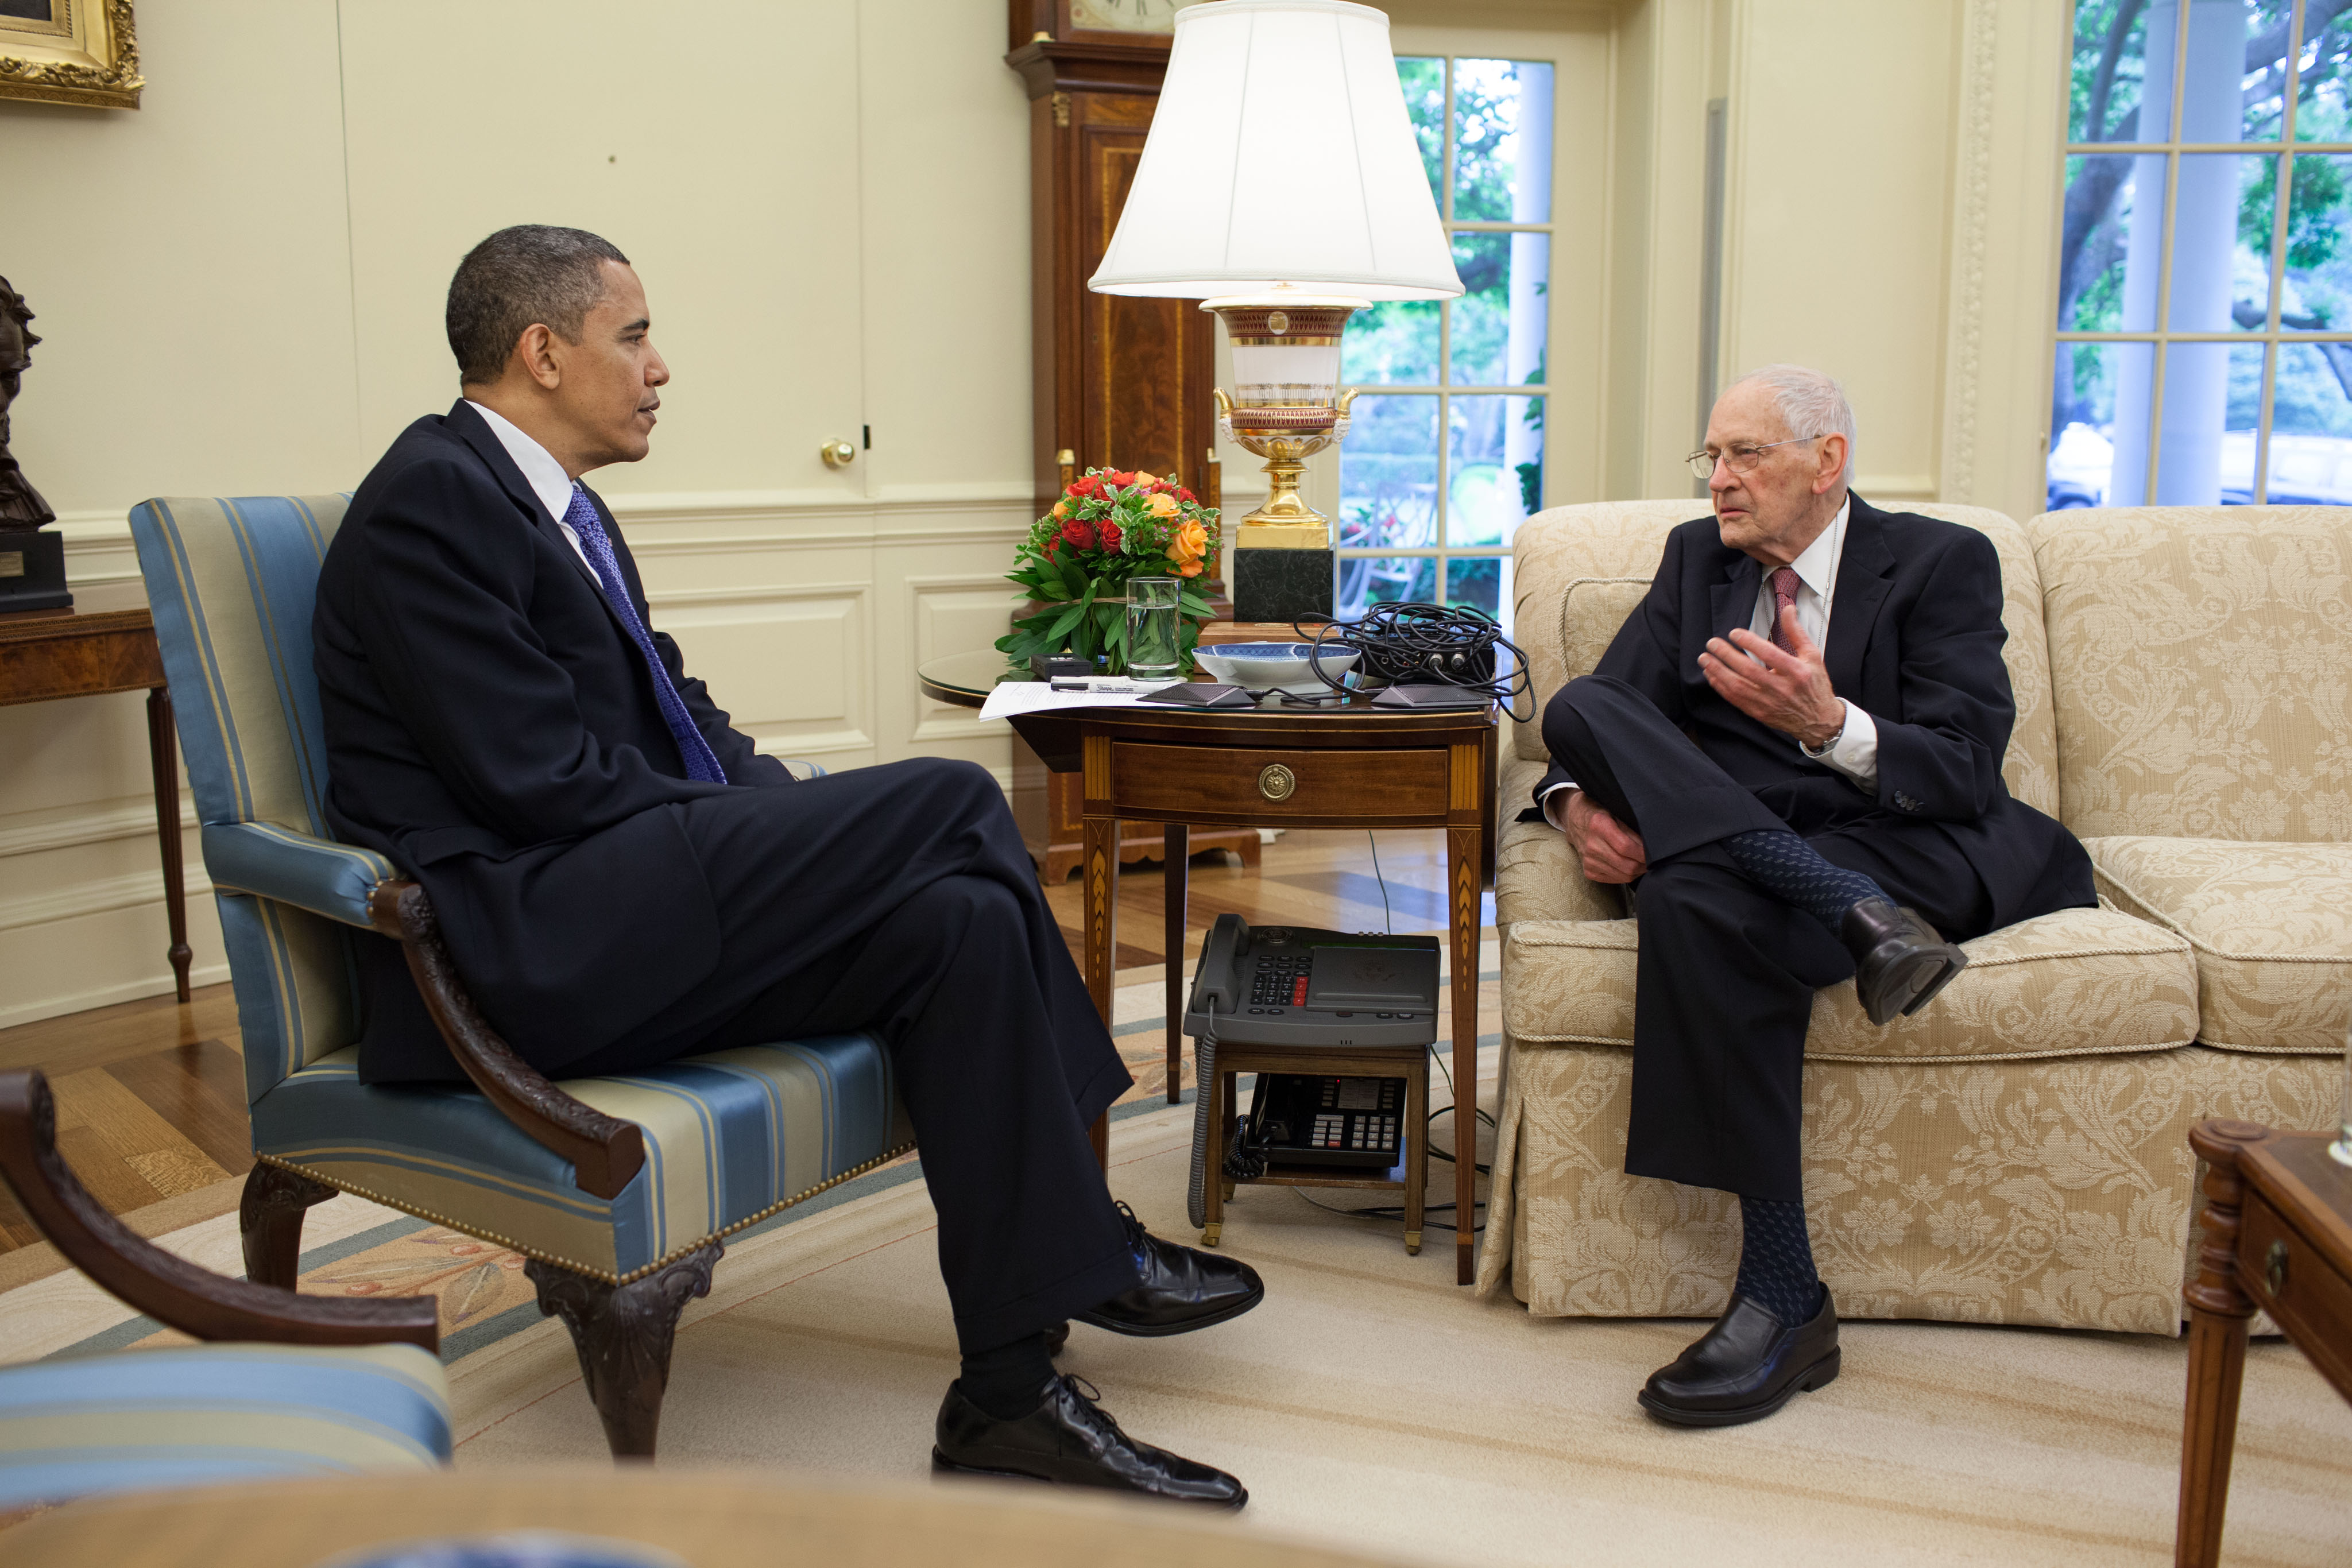 James Sterling Young, right, sits on a couch talking to President Barack Obama in the Oval Office